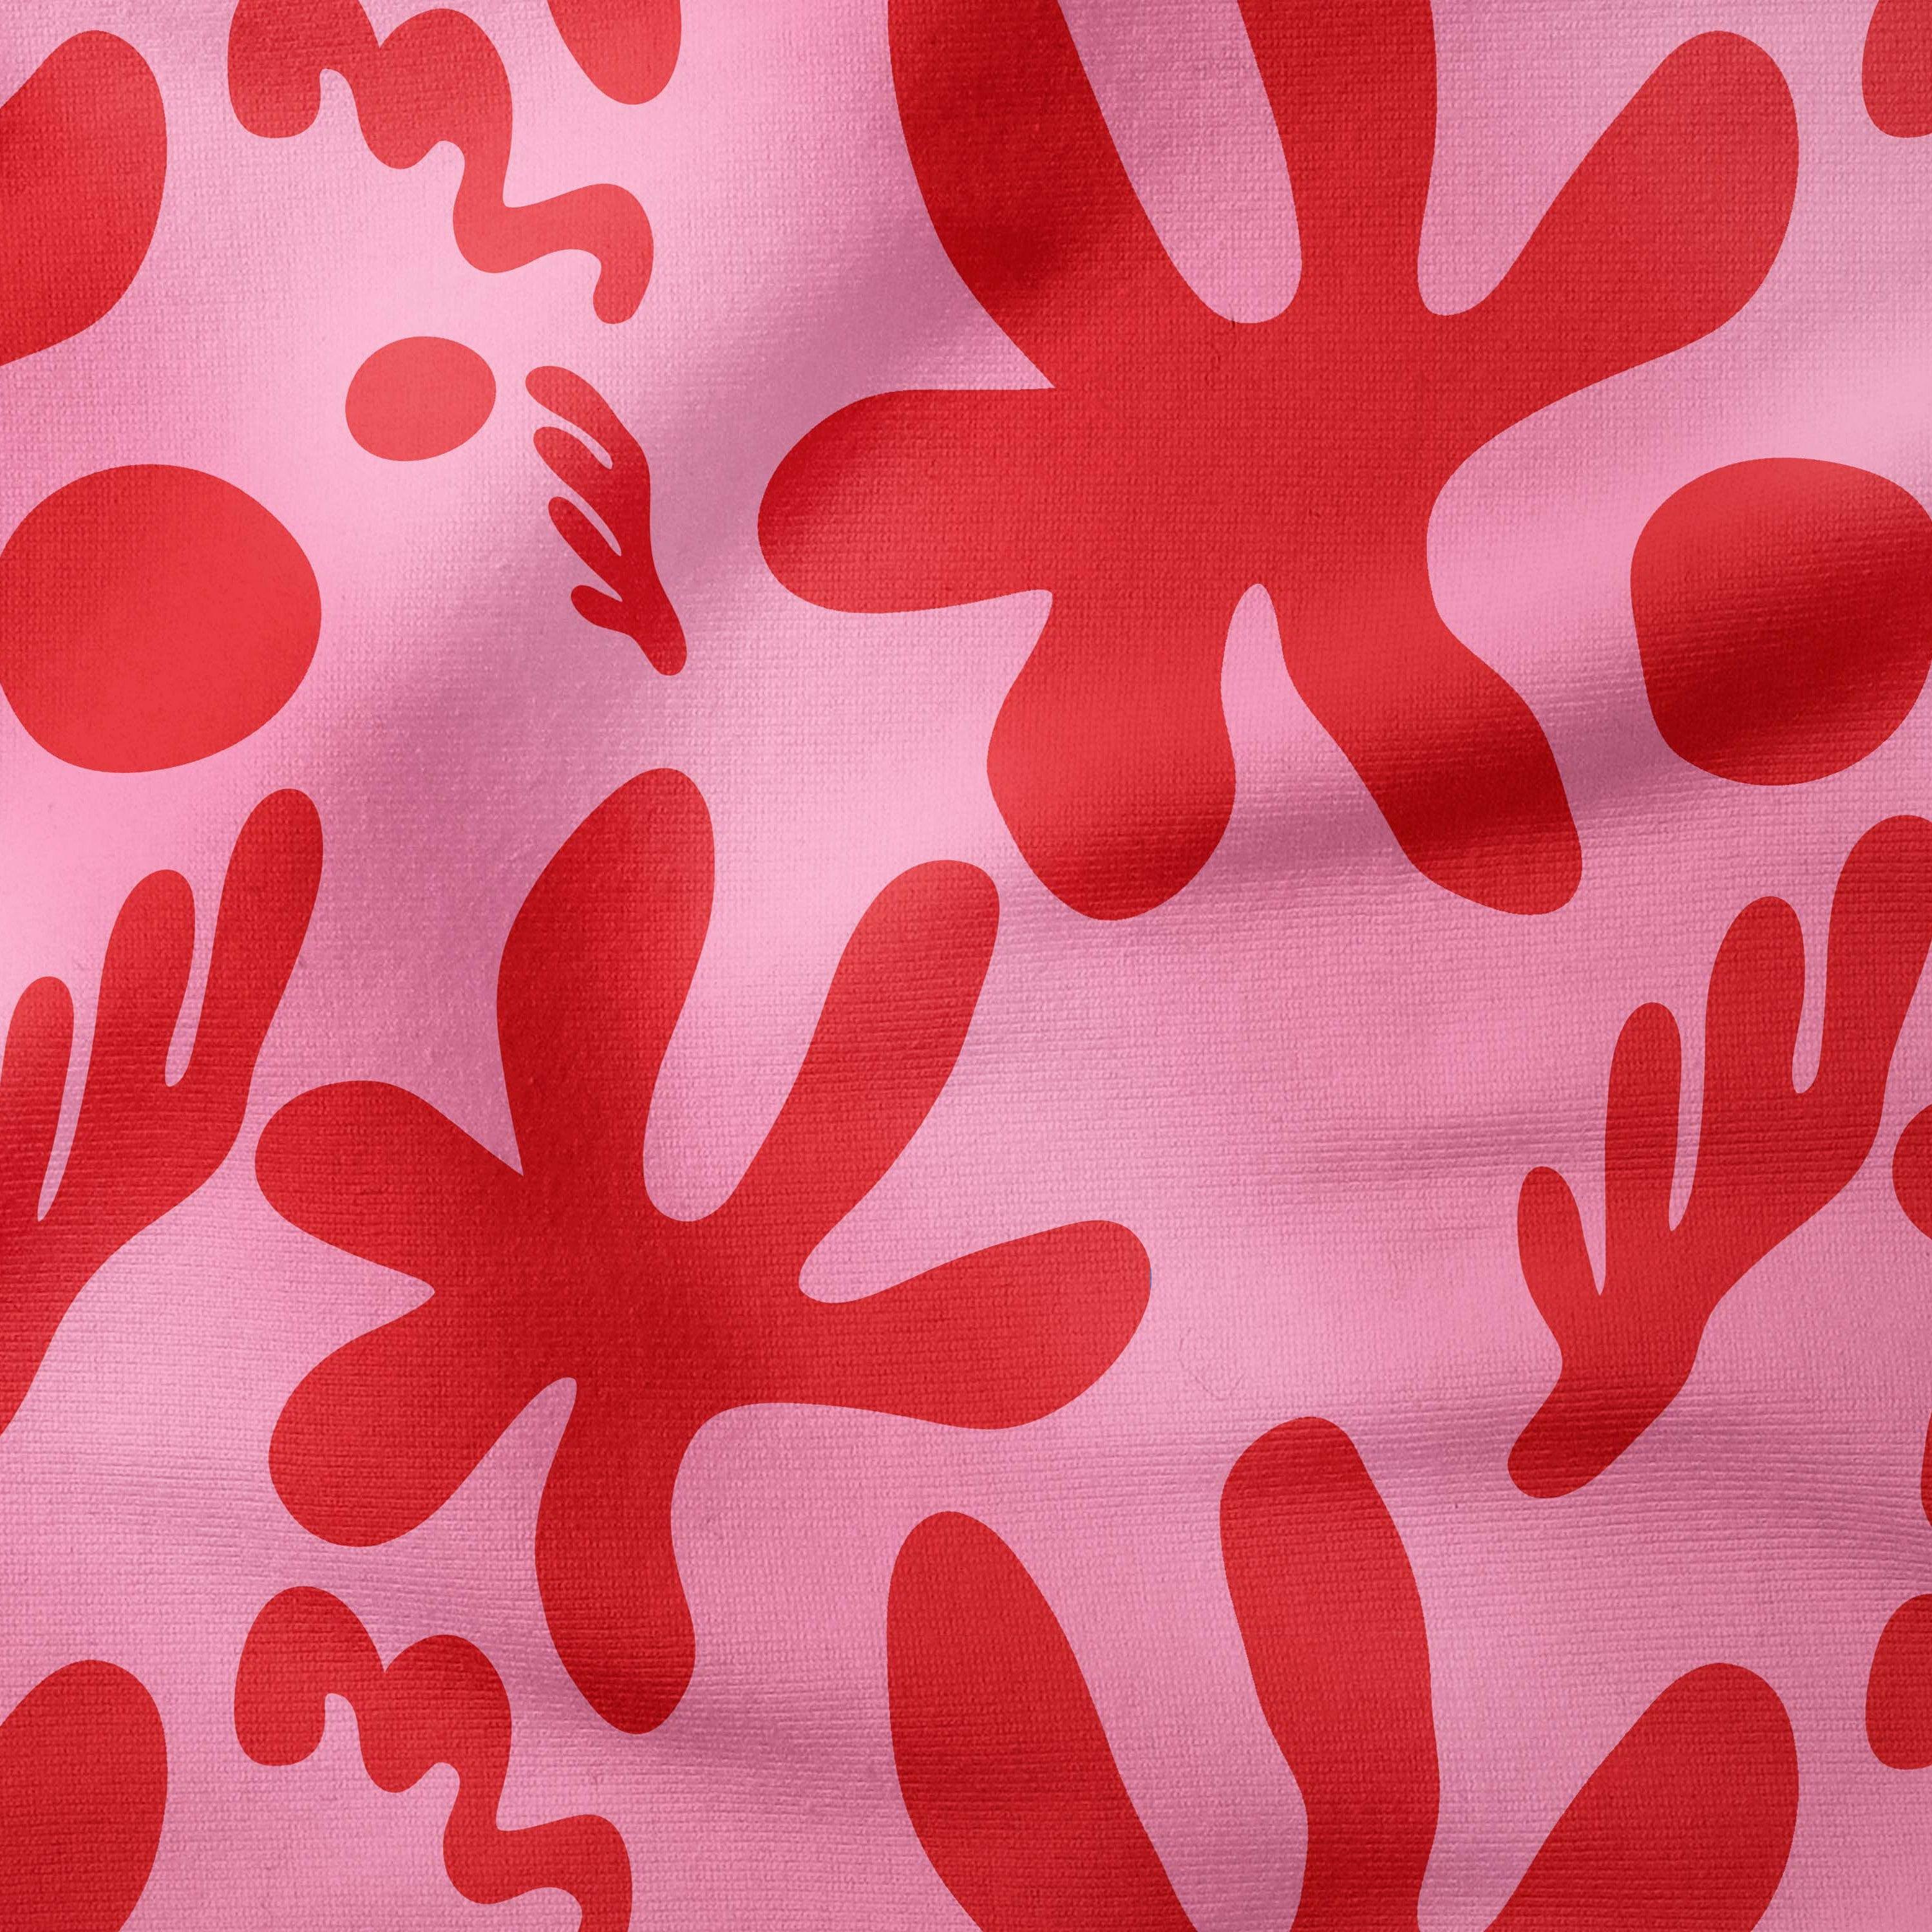 Abstract Flowers-Art Print Fabric-Melco Fabrics-Red on Pink-Cotton Poplin (110gsm)-Online-Fabric-Store-Australia